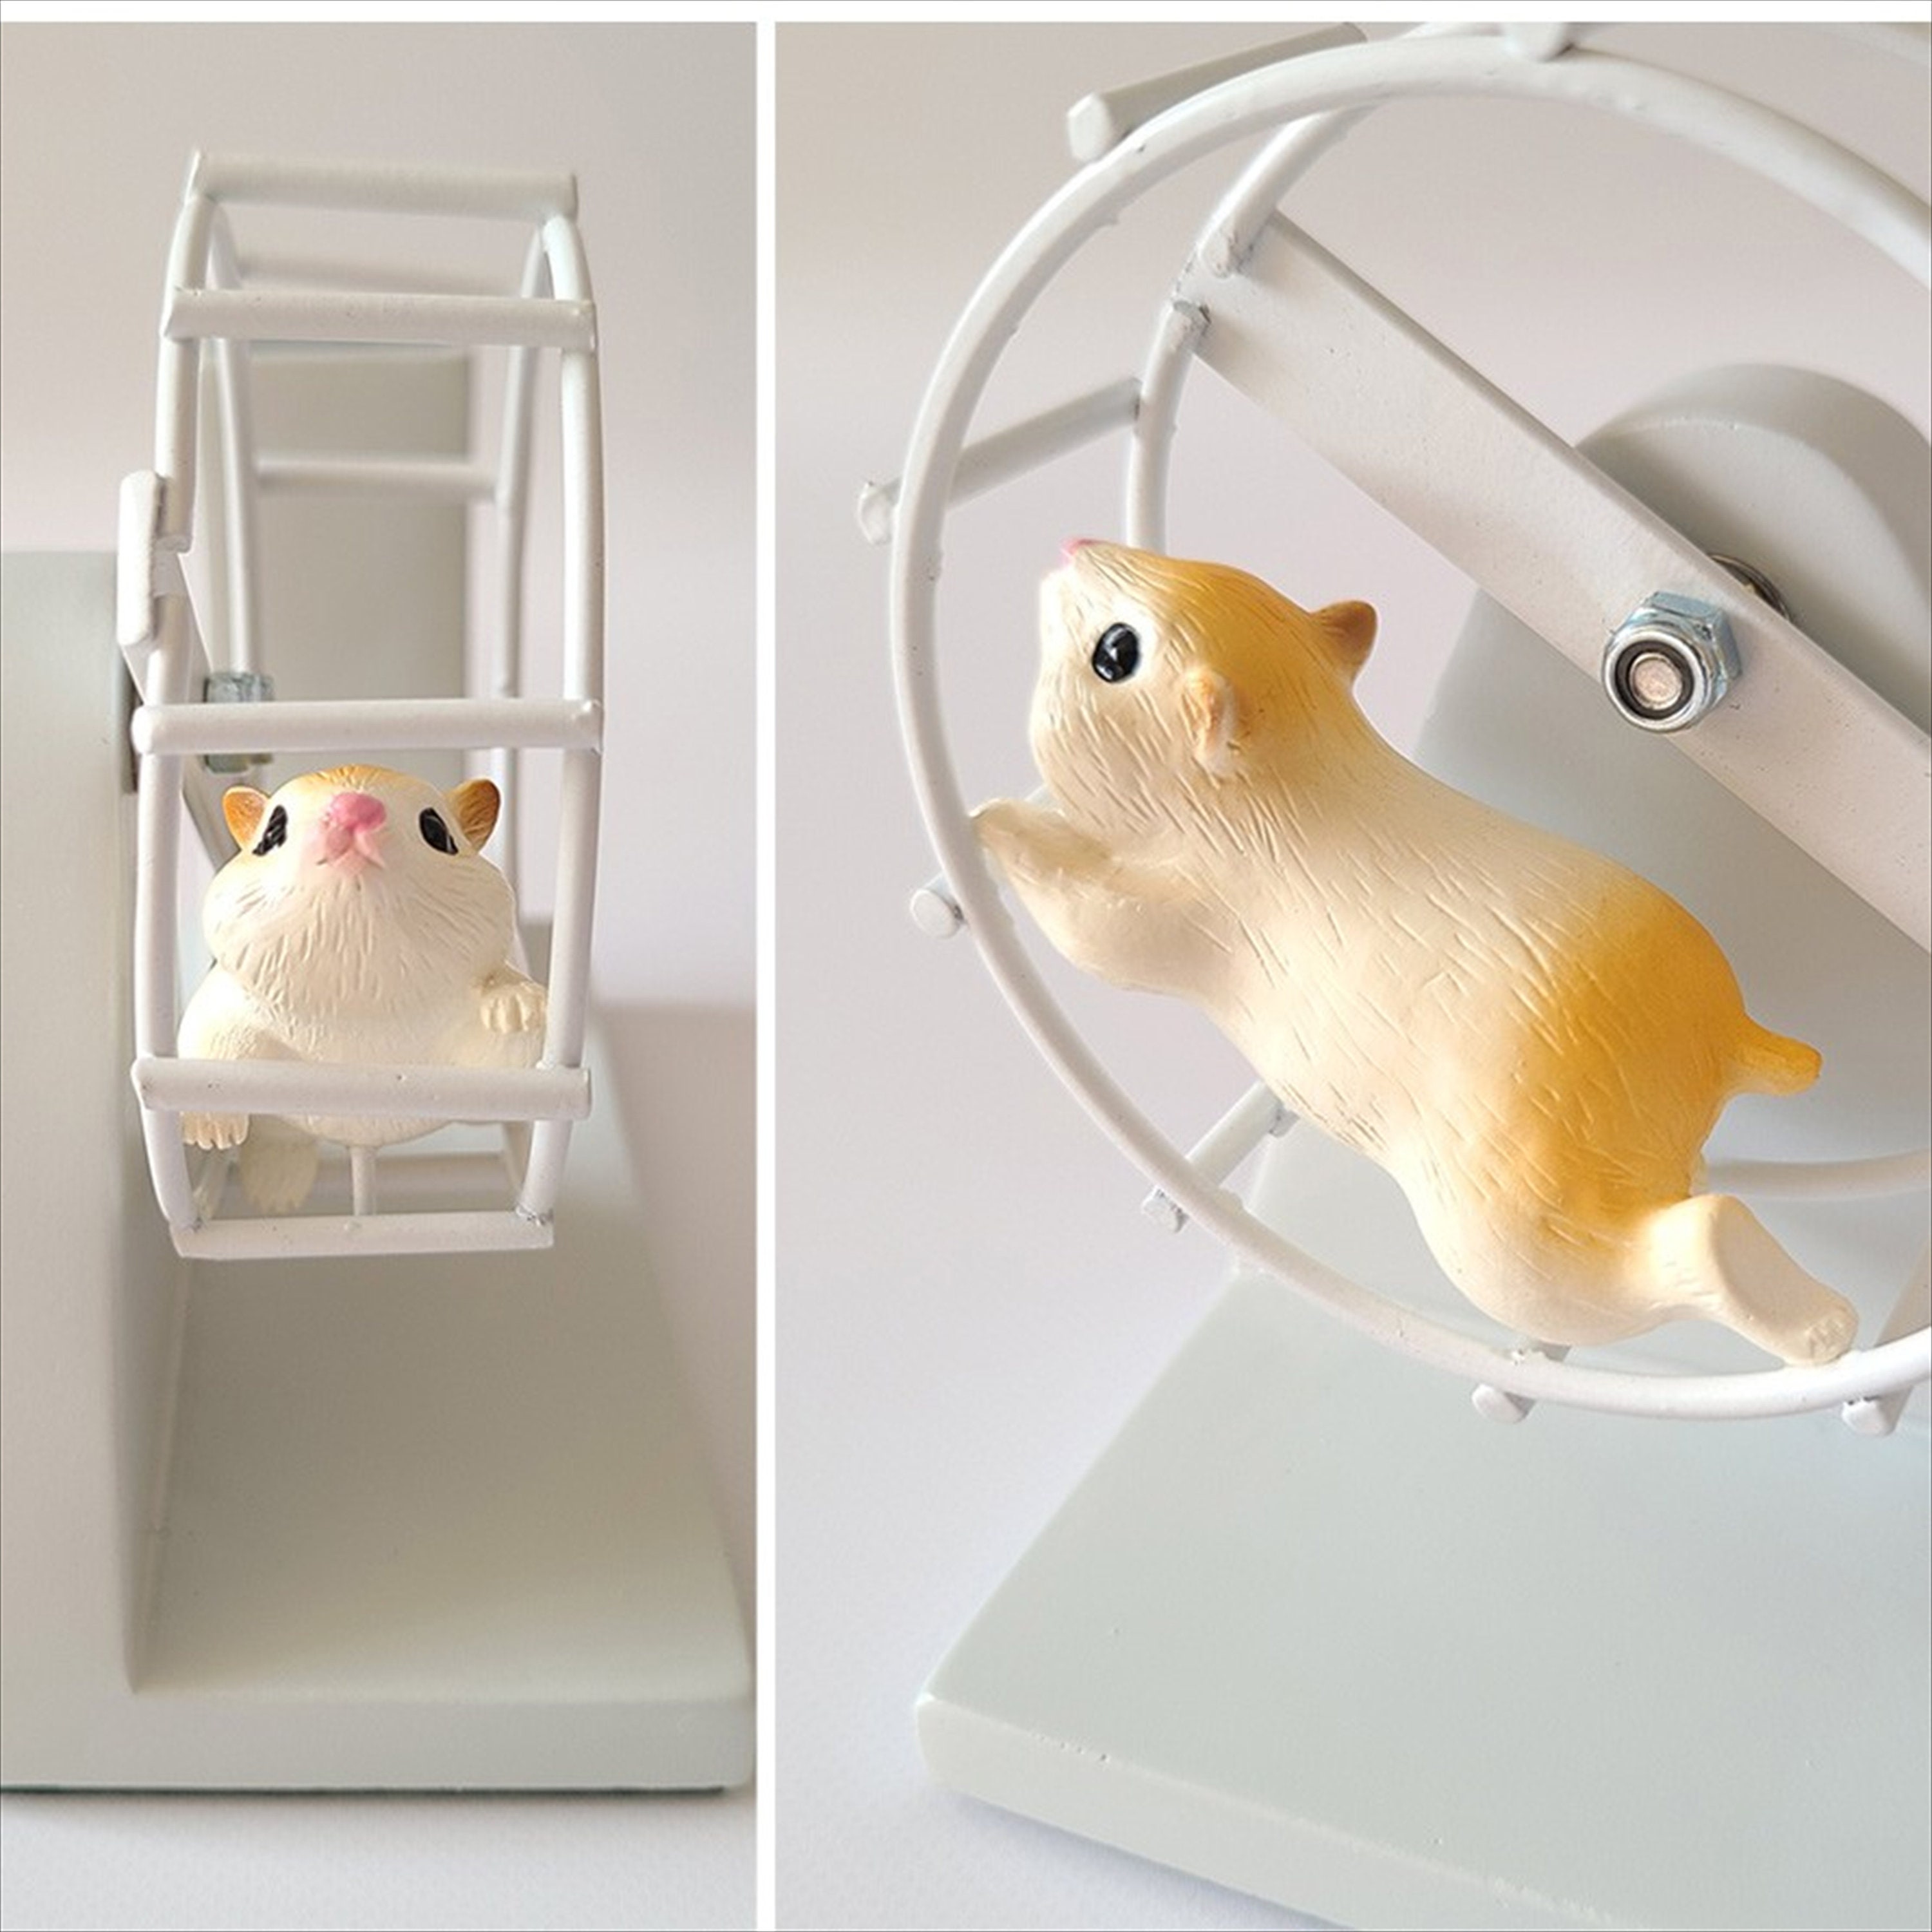 Cute & Stylish Tape Dispenser for Kids! (Pucca and Hamster Ago Mong)